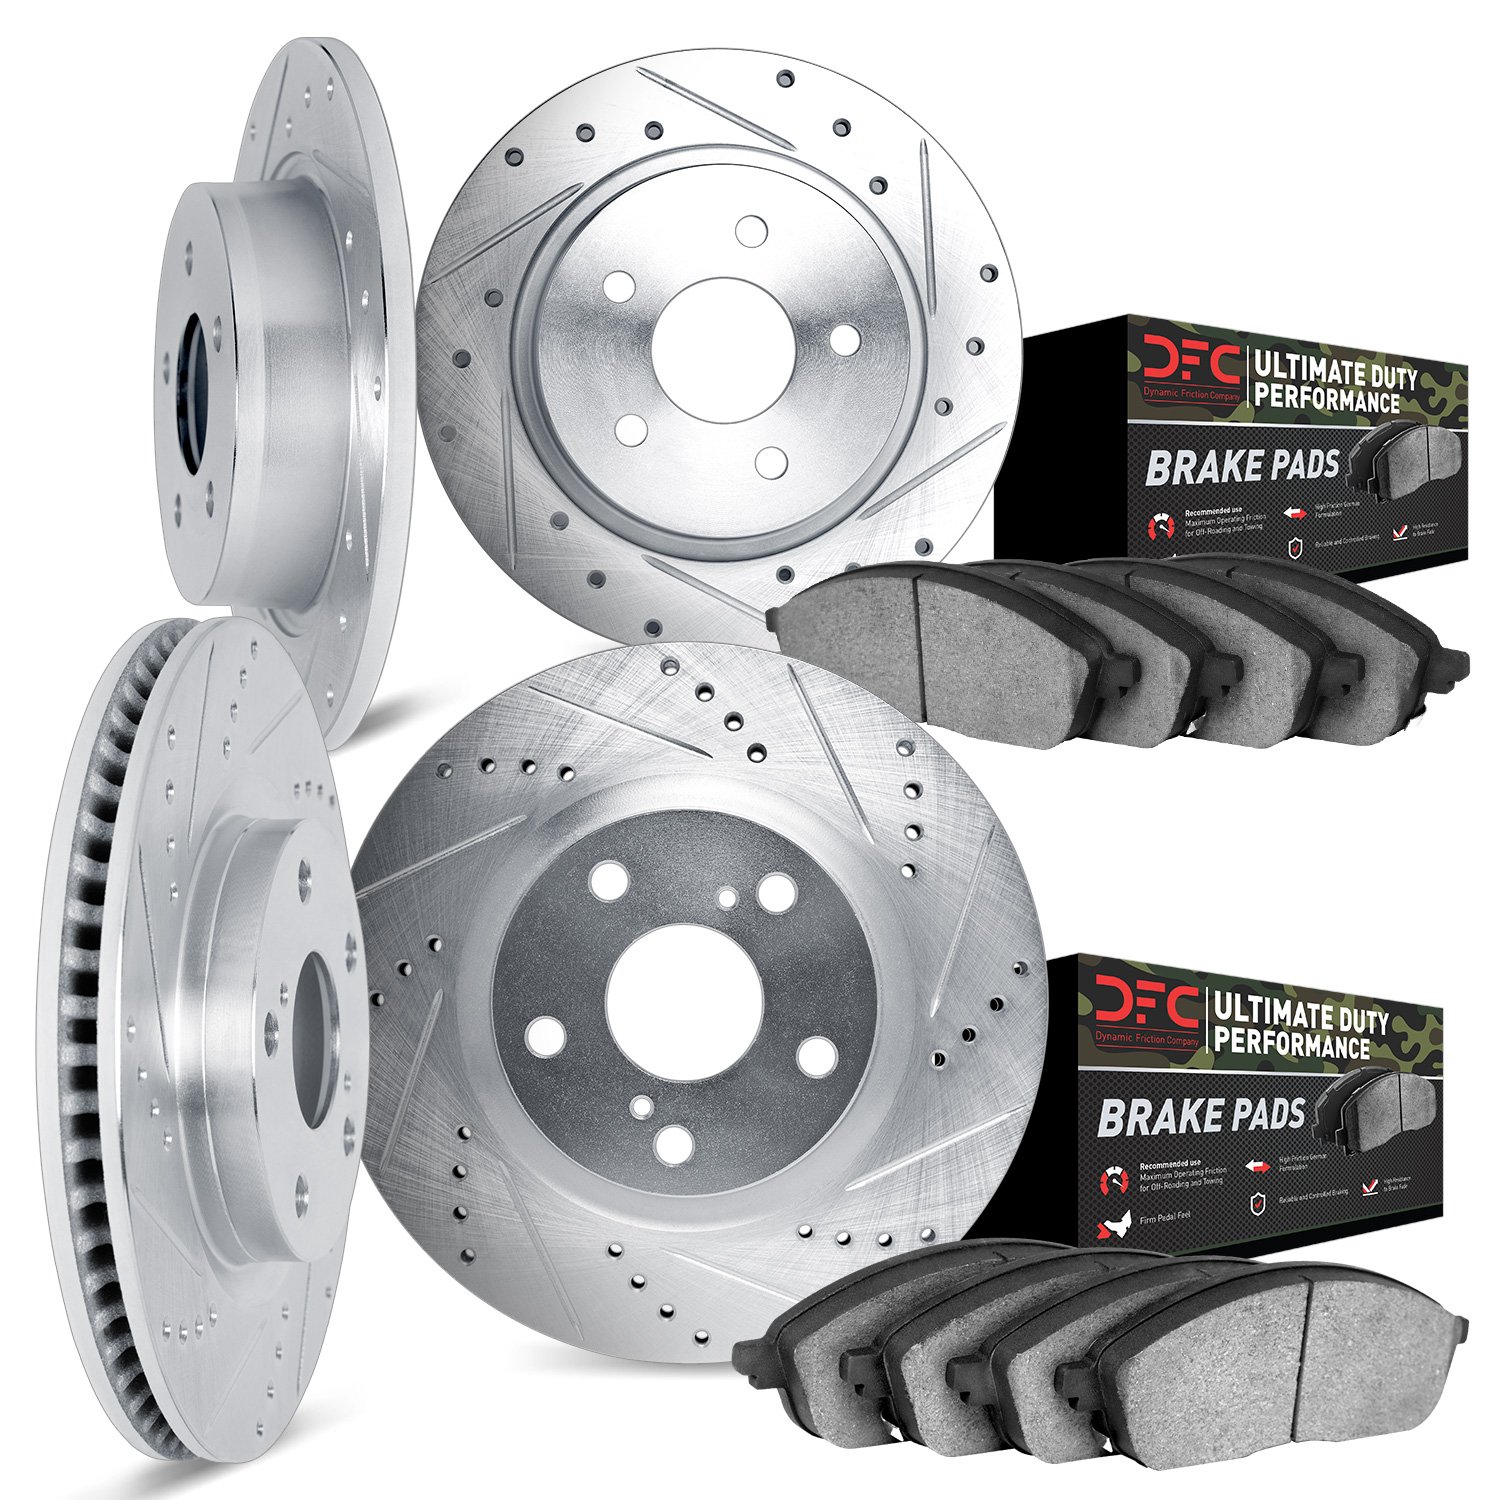 7404-54028 Drilled/Slotted Brake Rotors with Ultimate-Duty Brake Pads Kit [Silver], 1997-2002 Ford/Lincoln/Mercury/Mazda, Positi